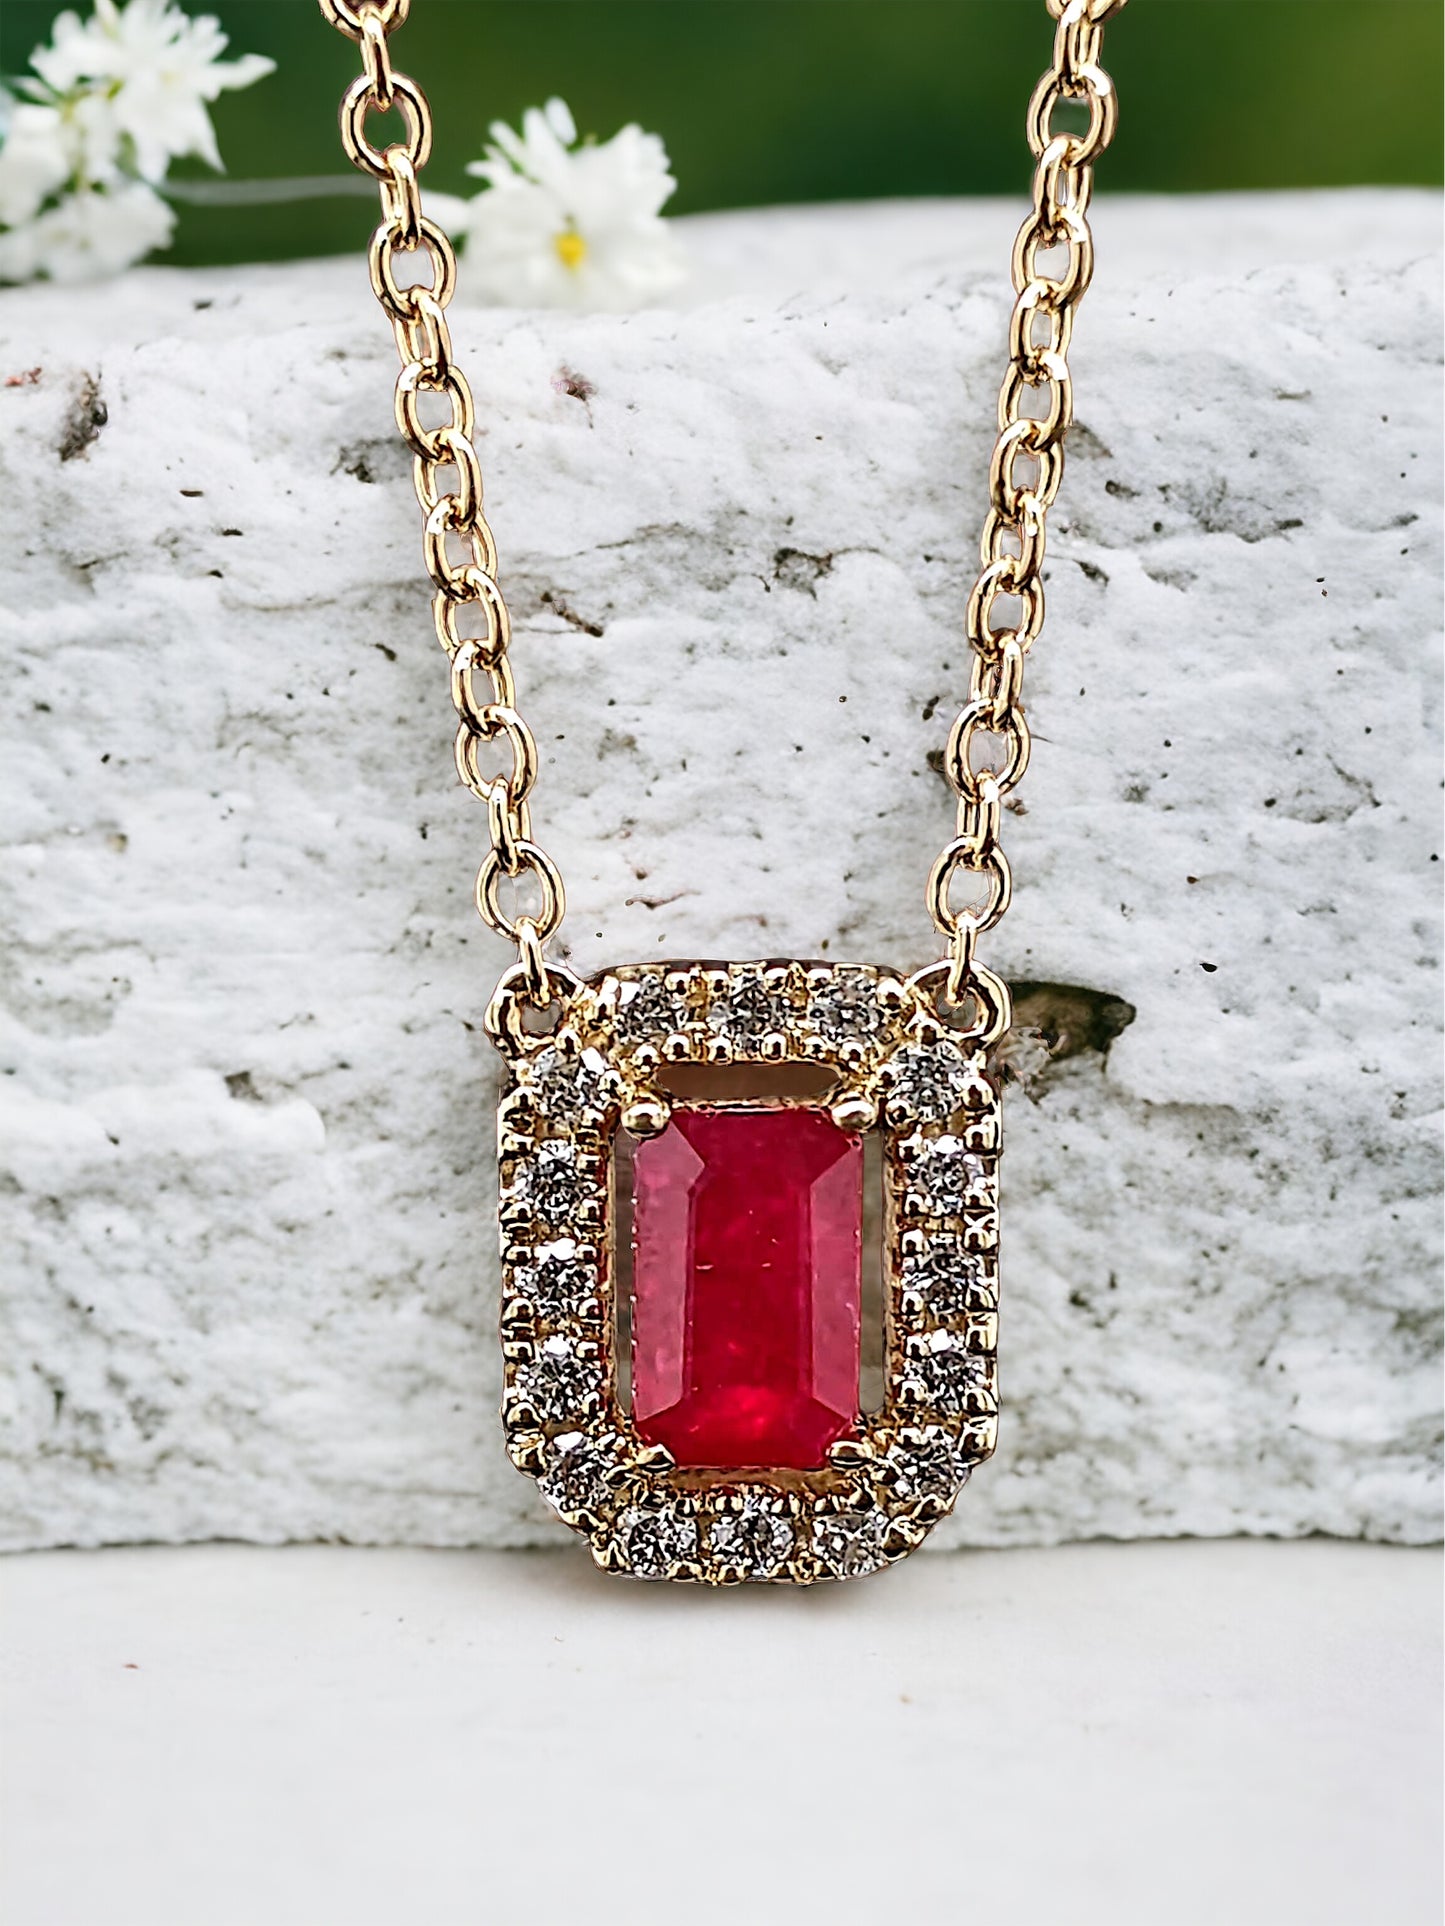 Monroe - 14k Yellow Gold, Ruby, and Diamond Necklace